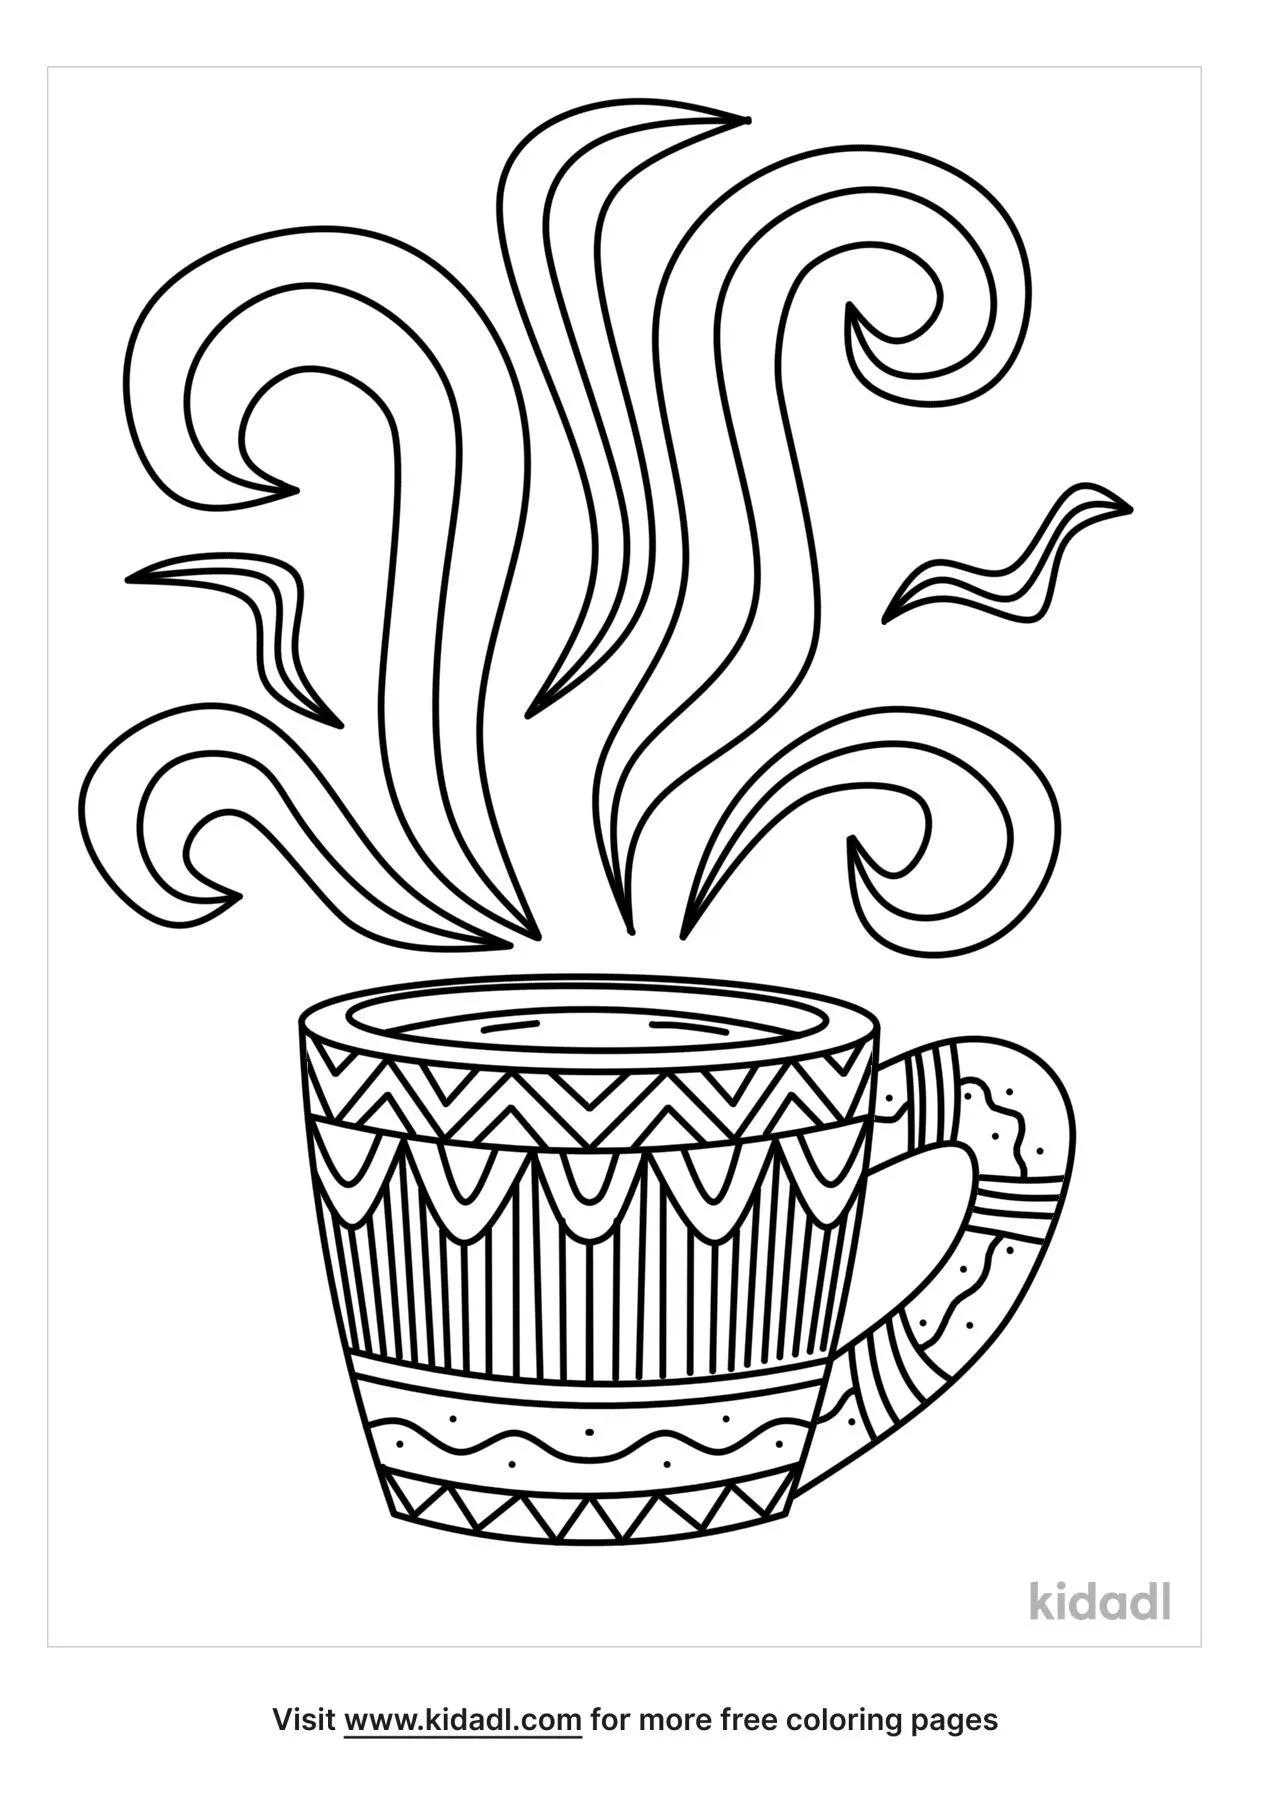 Teacup Zentangle Coloring Page